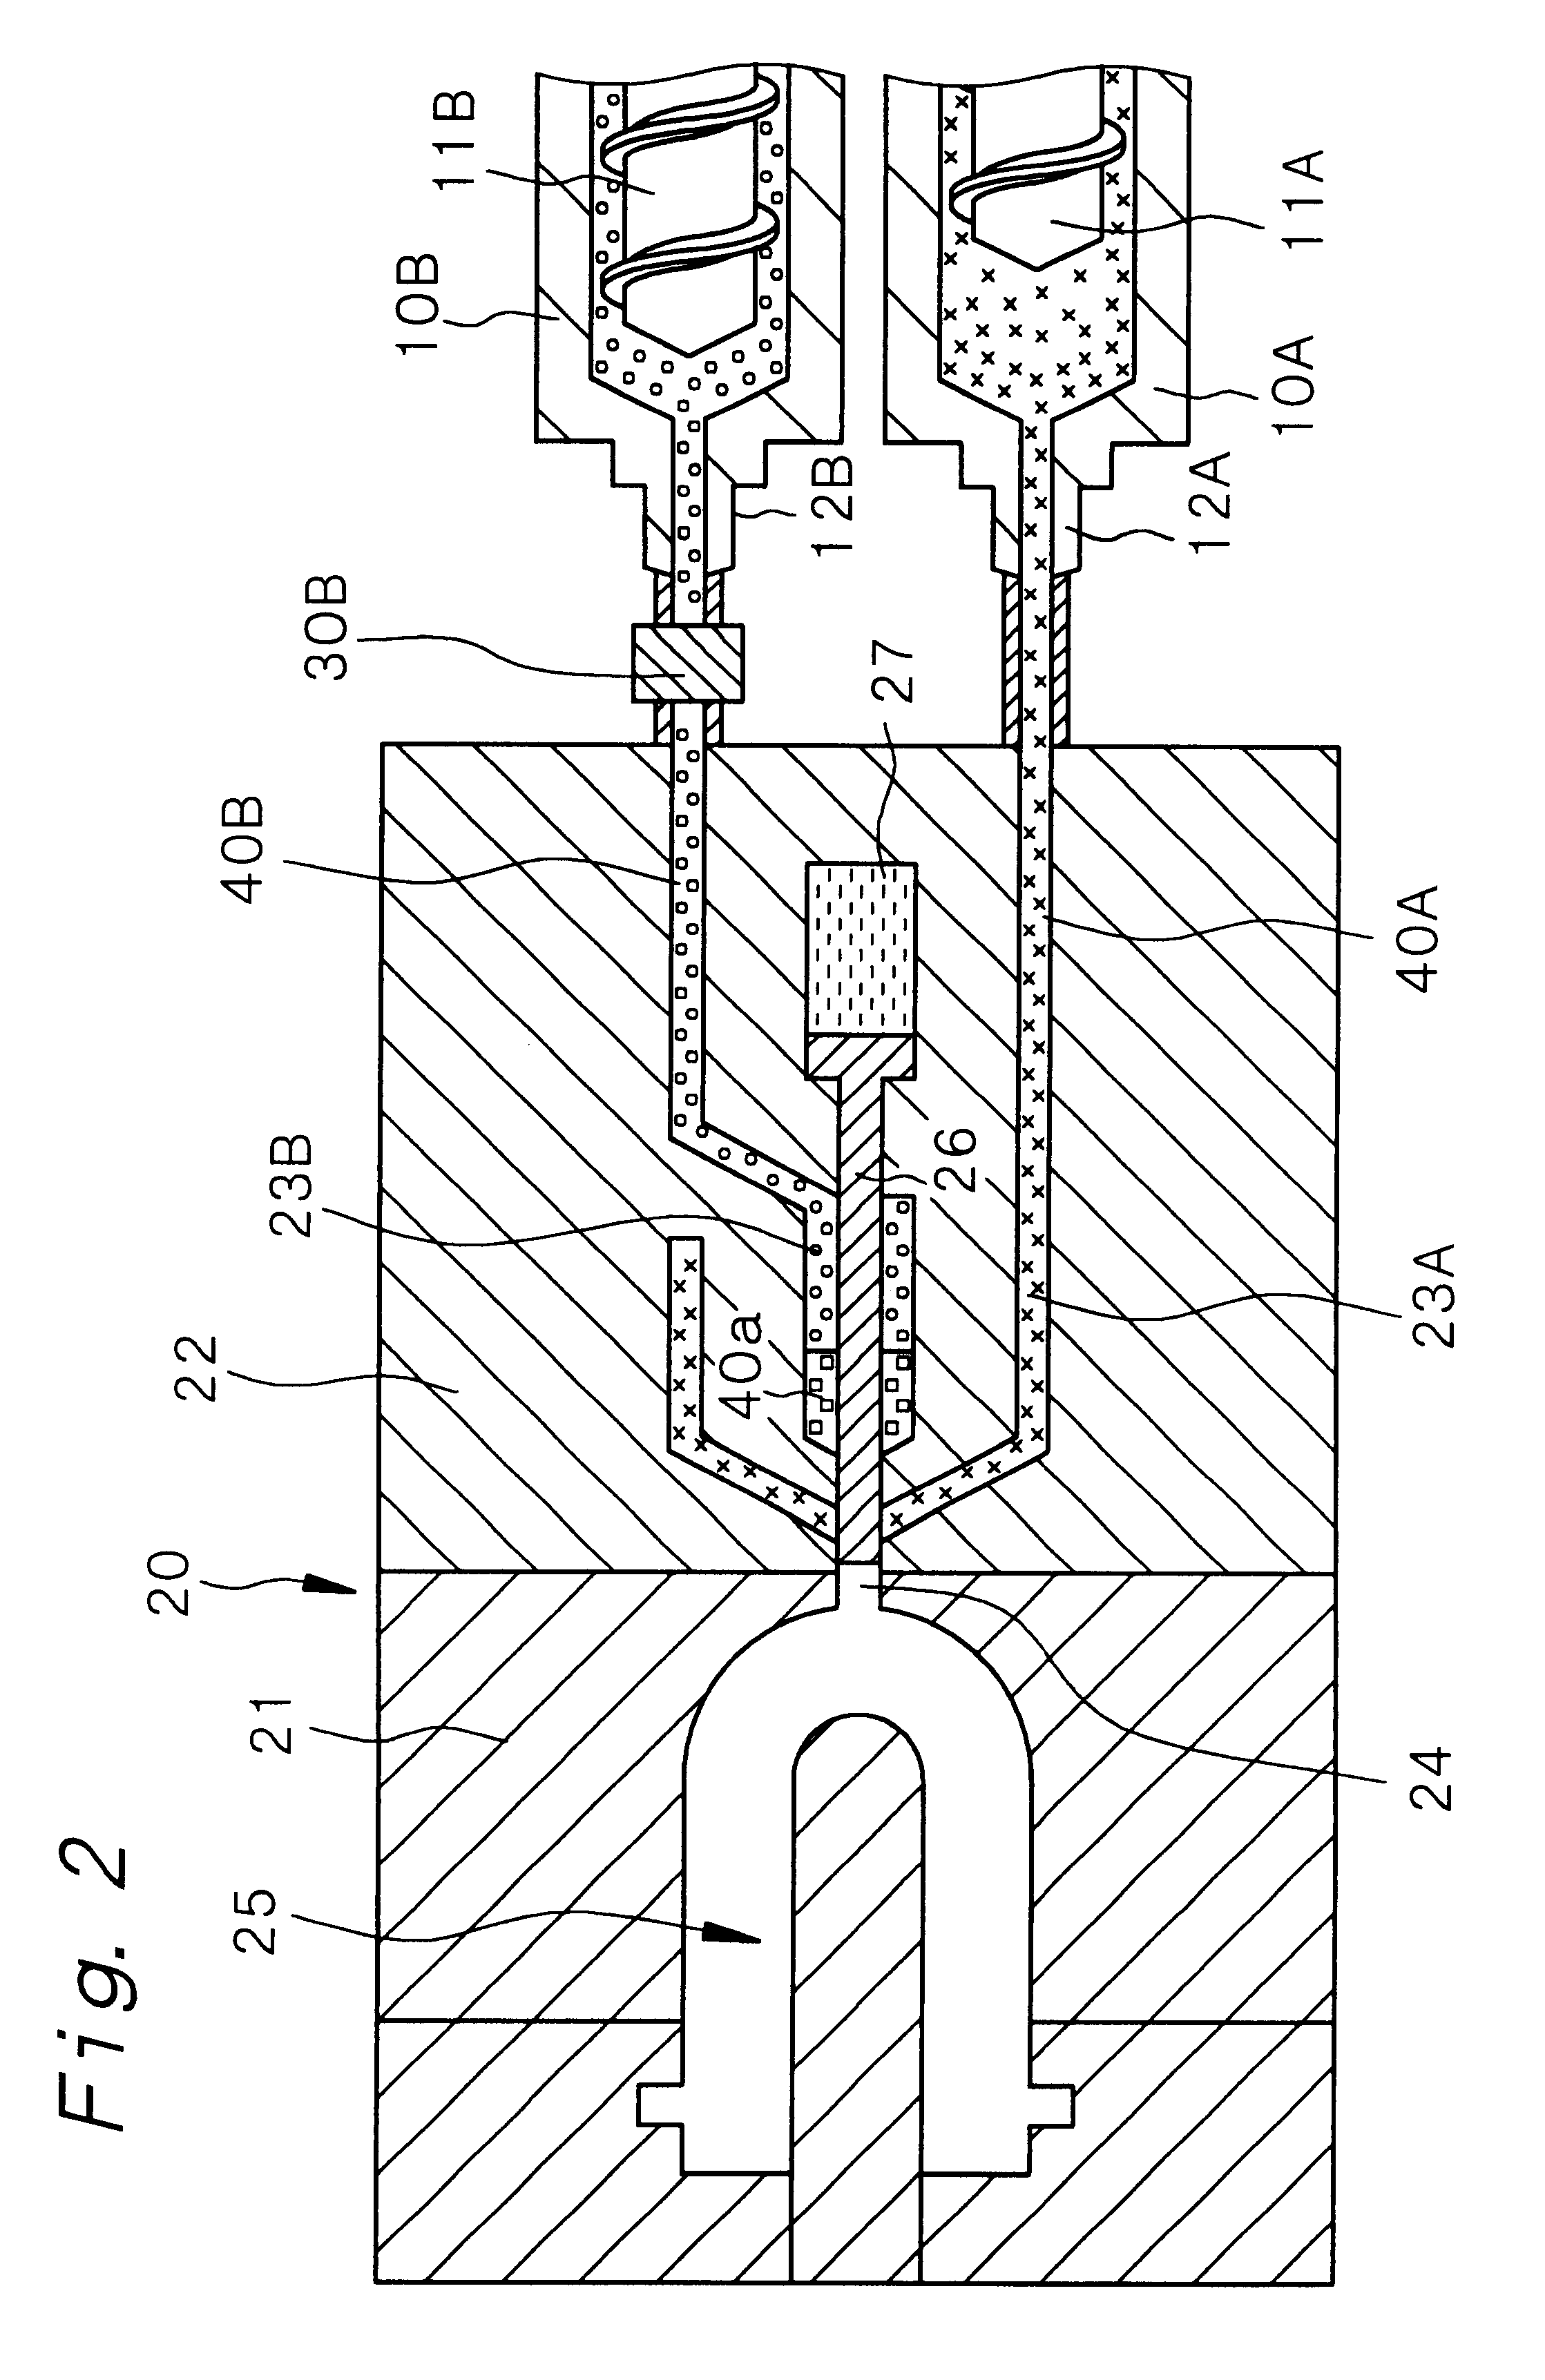 Injection molding apparatus for molding multi-layered articles